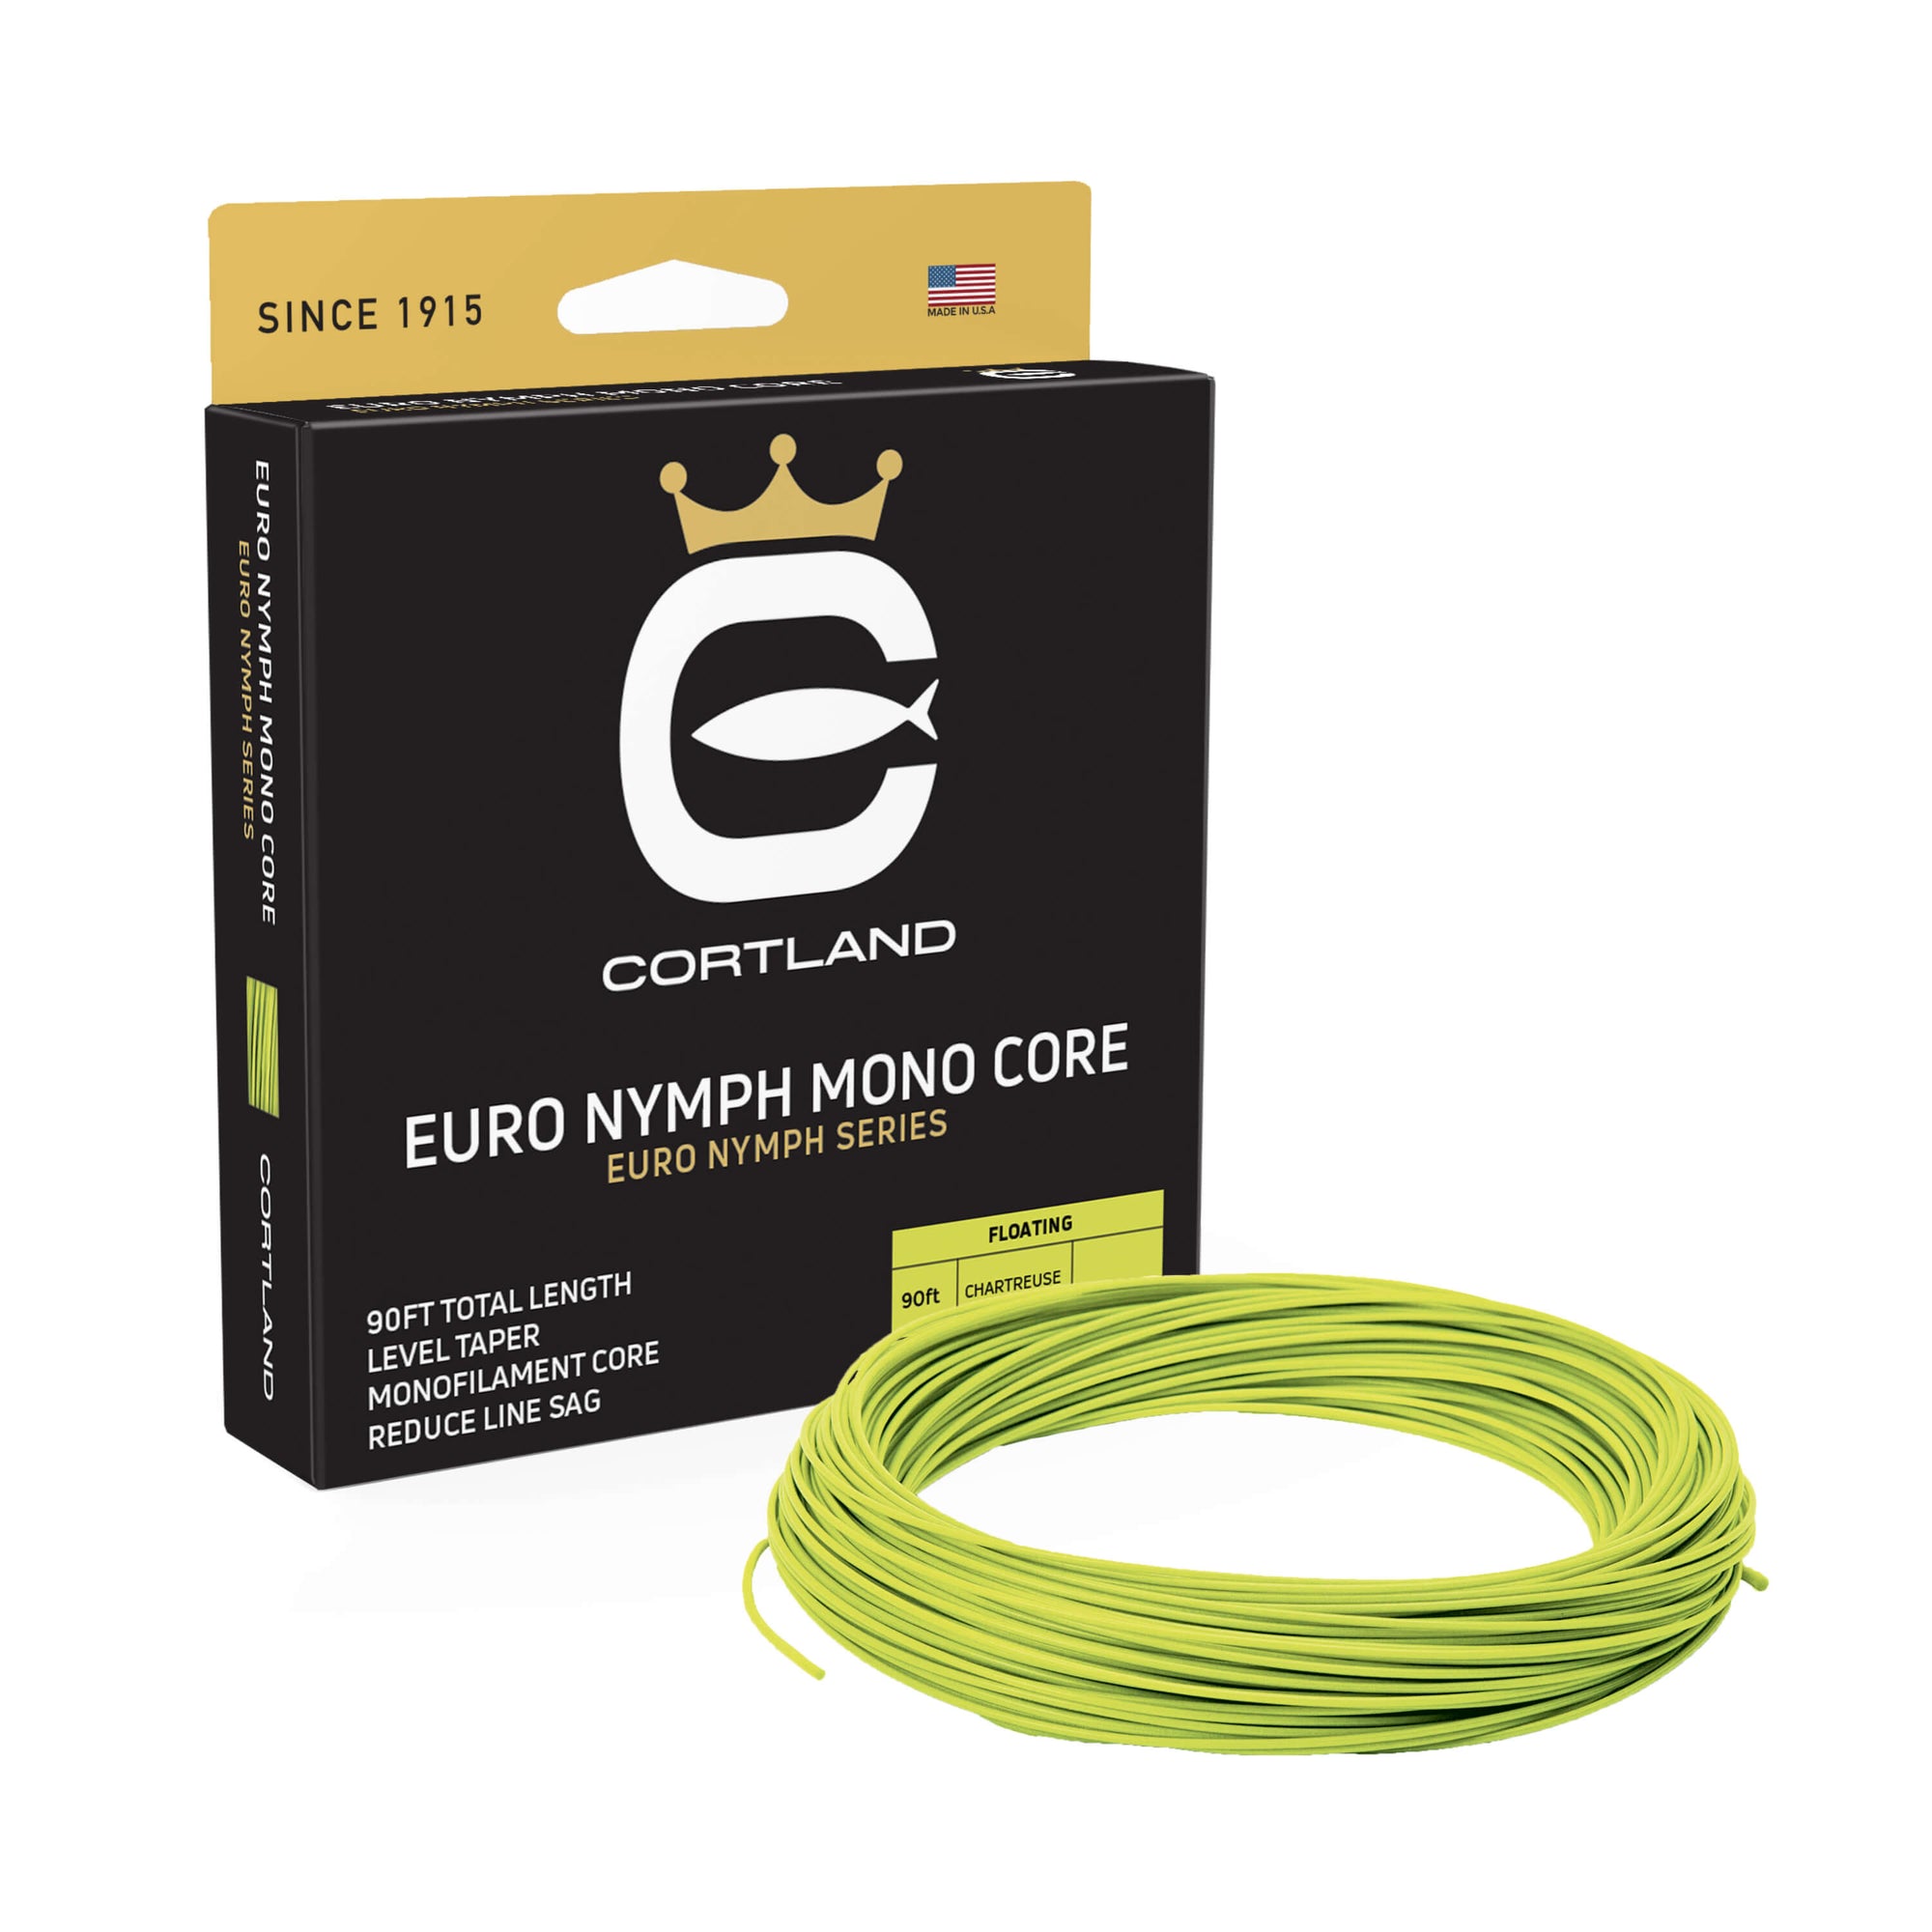 Hi-Vis Nymph Mono Core Fly Line Box and coil. The coil is chartreuse. The box has the Cortland Logo and is black and bronze.